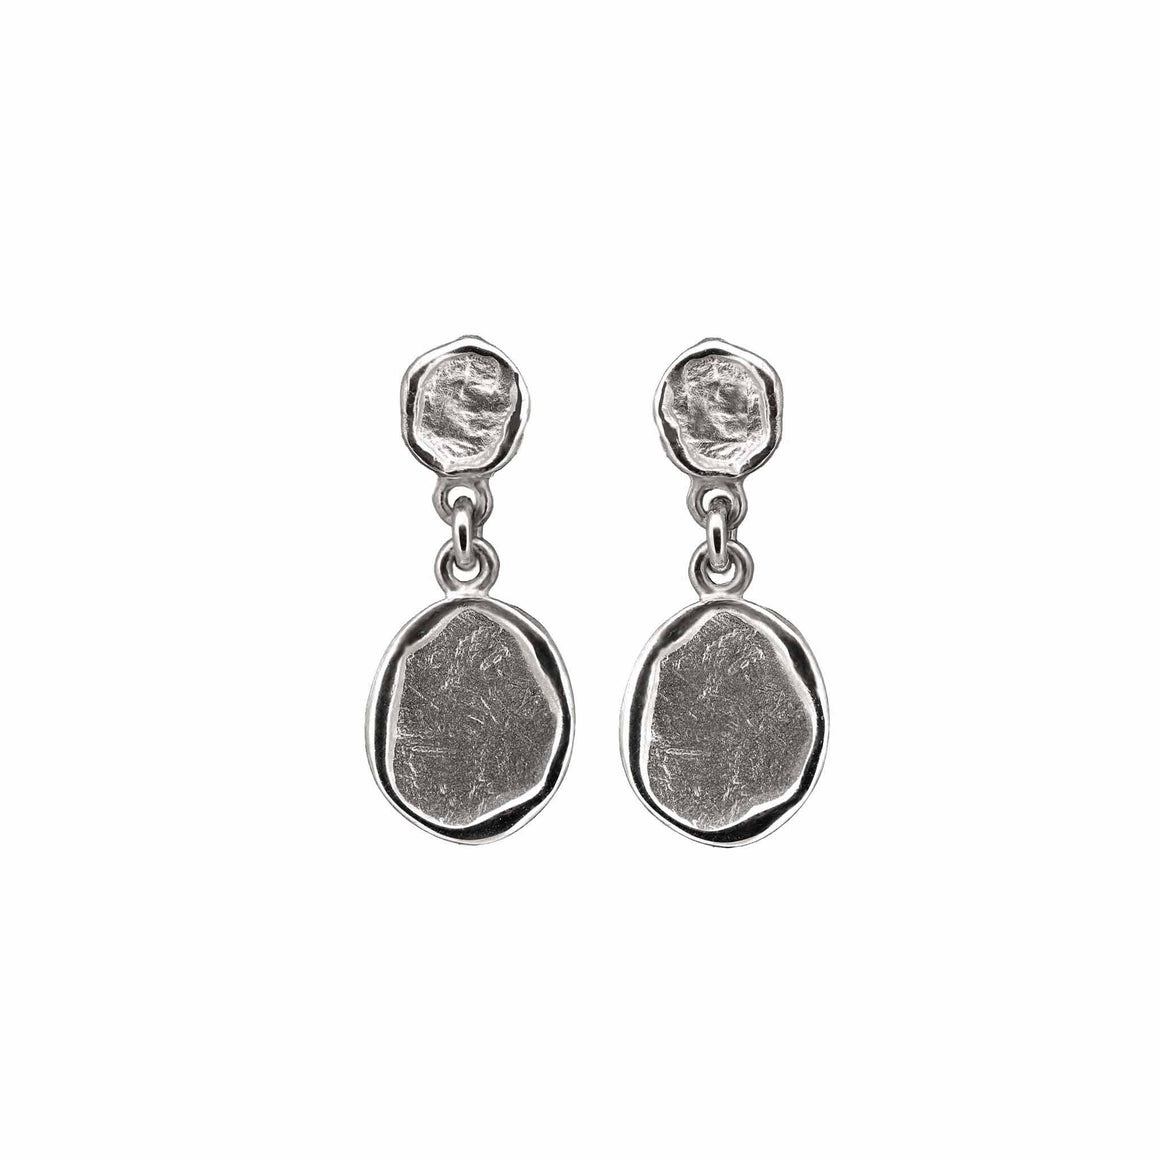 Double seal earring in white gold